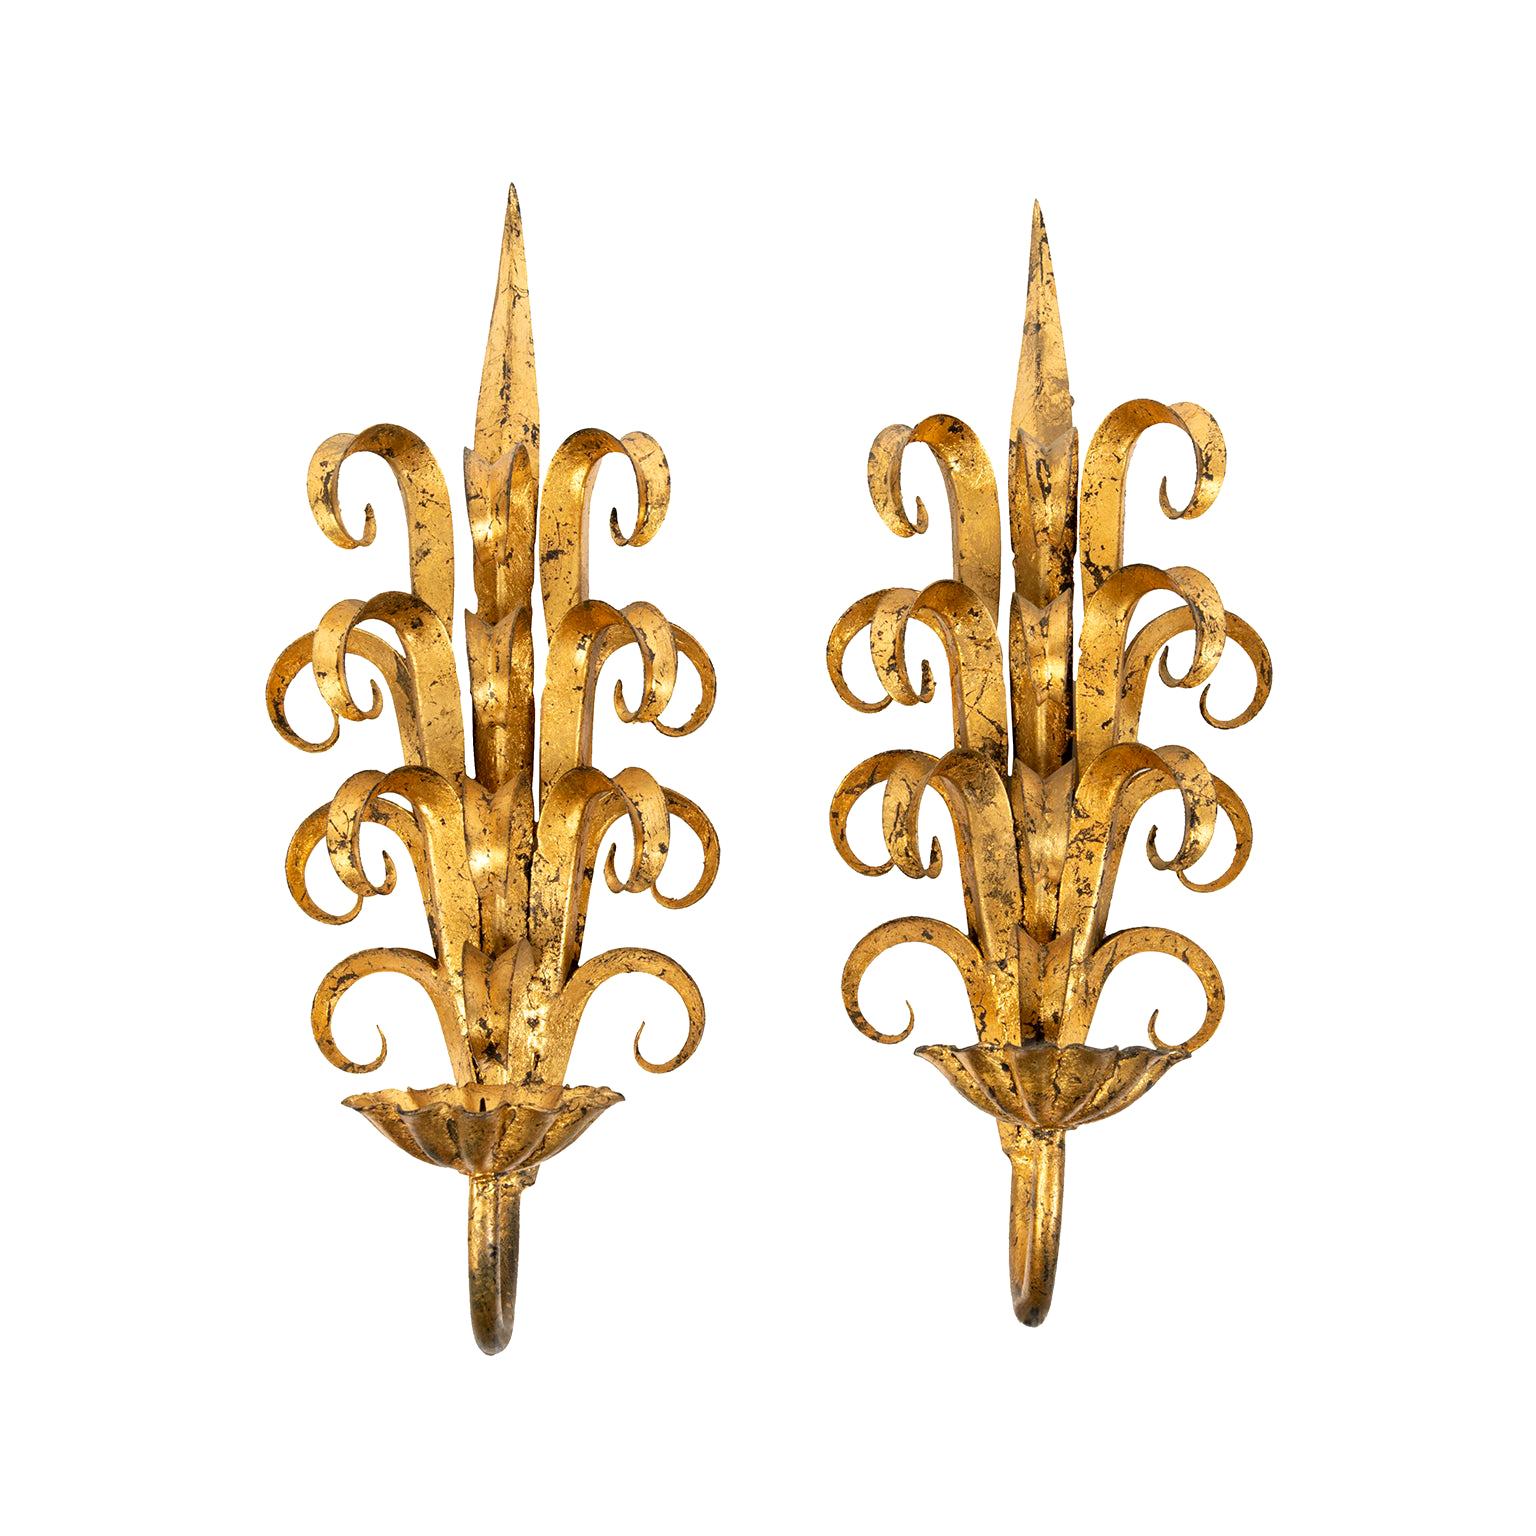 Pair of Midcentury Art Deco Style Wall Sconces from Italy